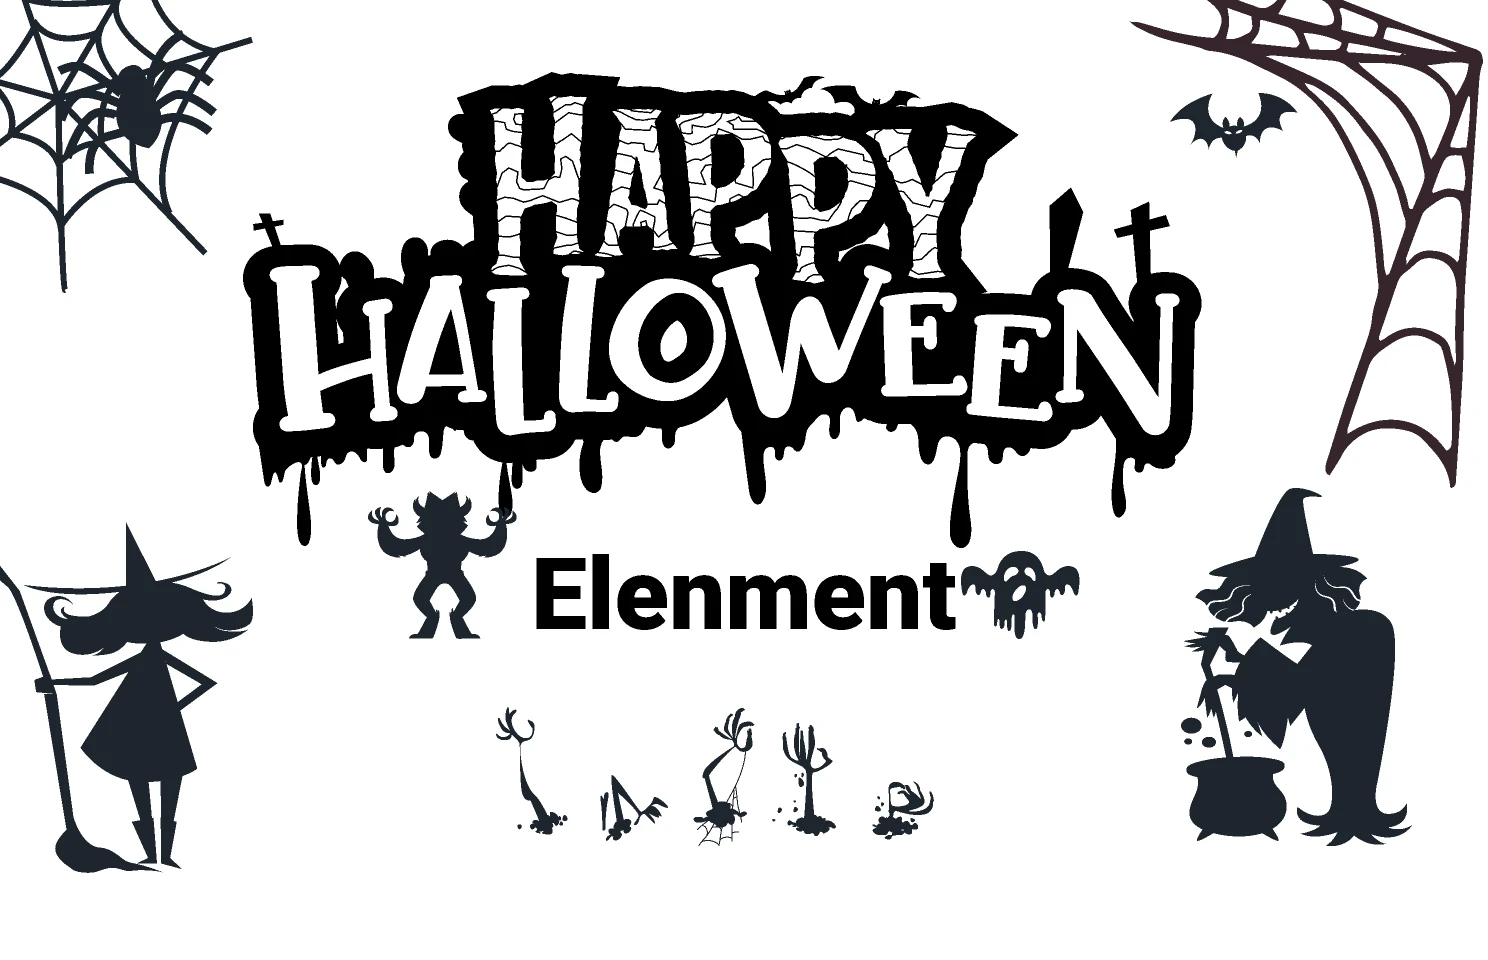 Halloween Element Figma Free for Figma and Adobe XD